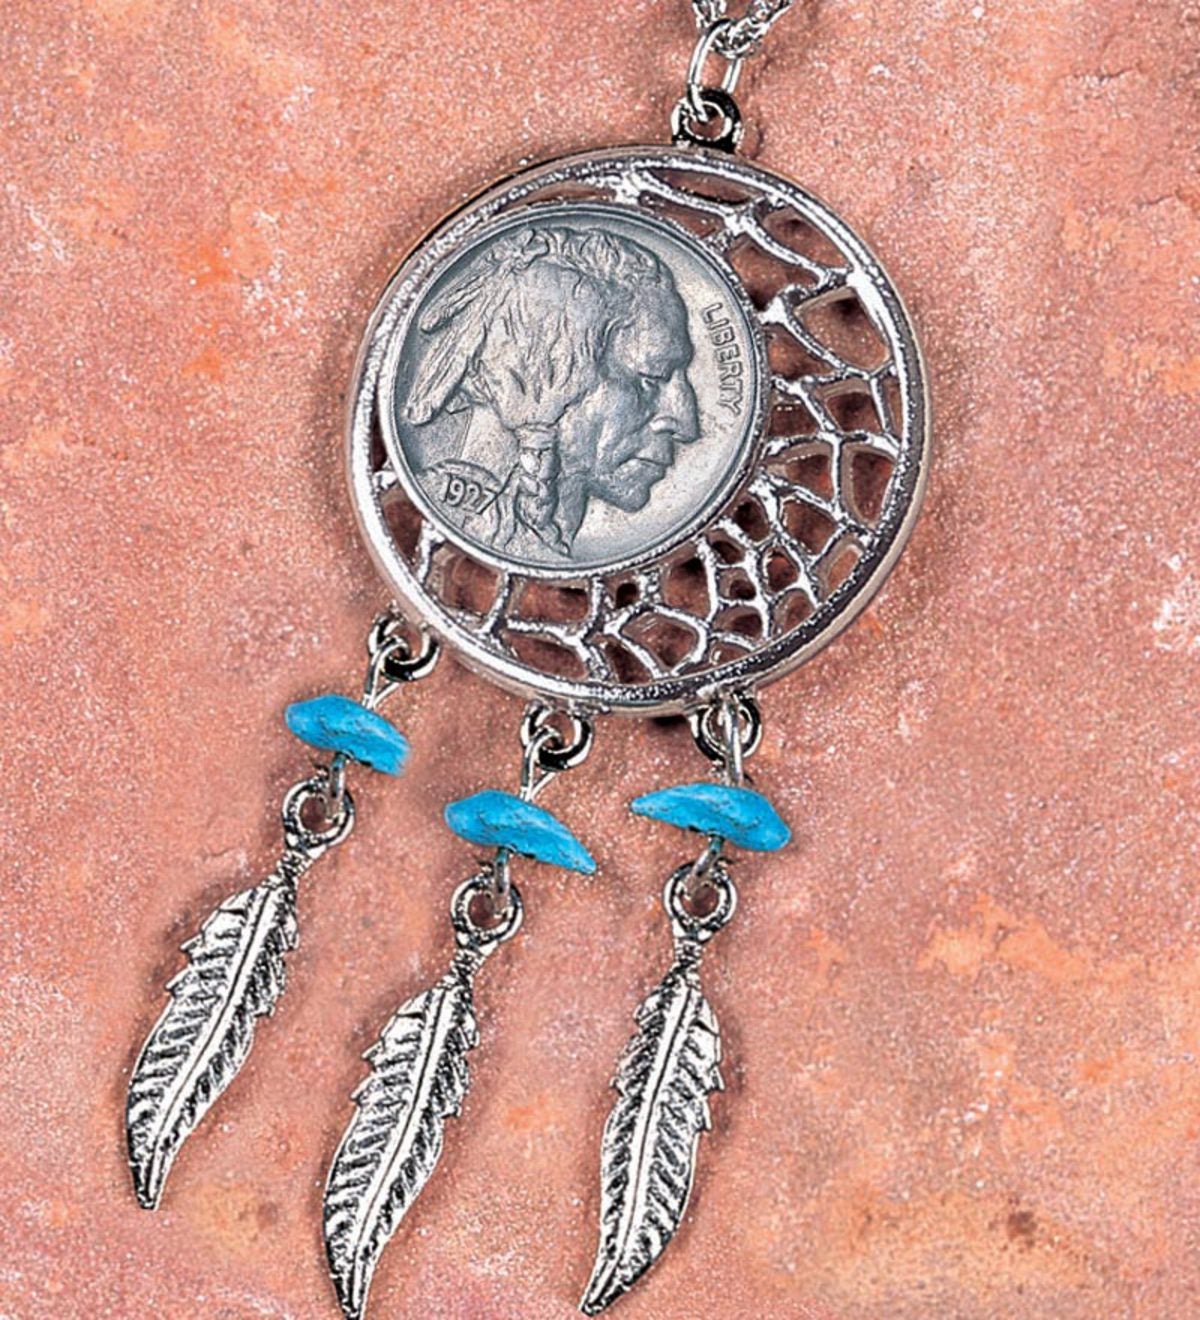 Necklace authentic Buffalo Indian Nickel coin feather pendant dream catcher 